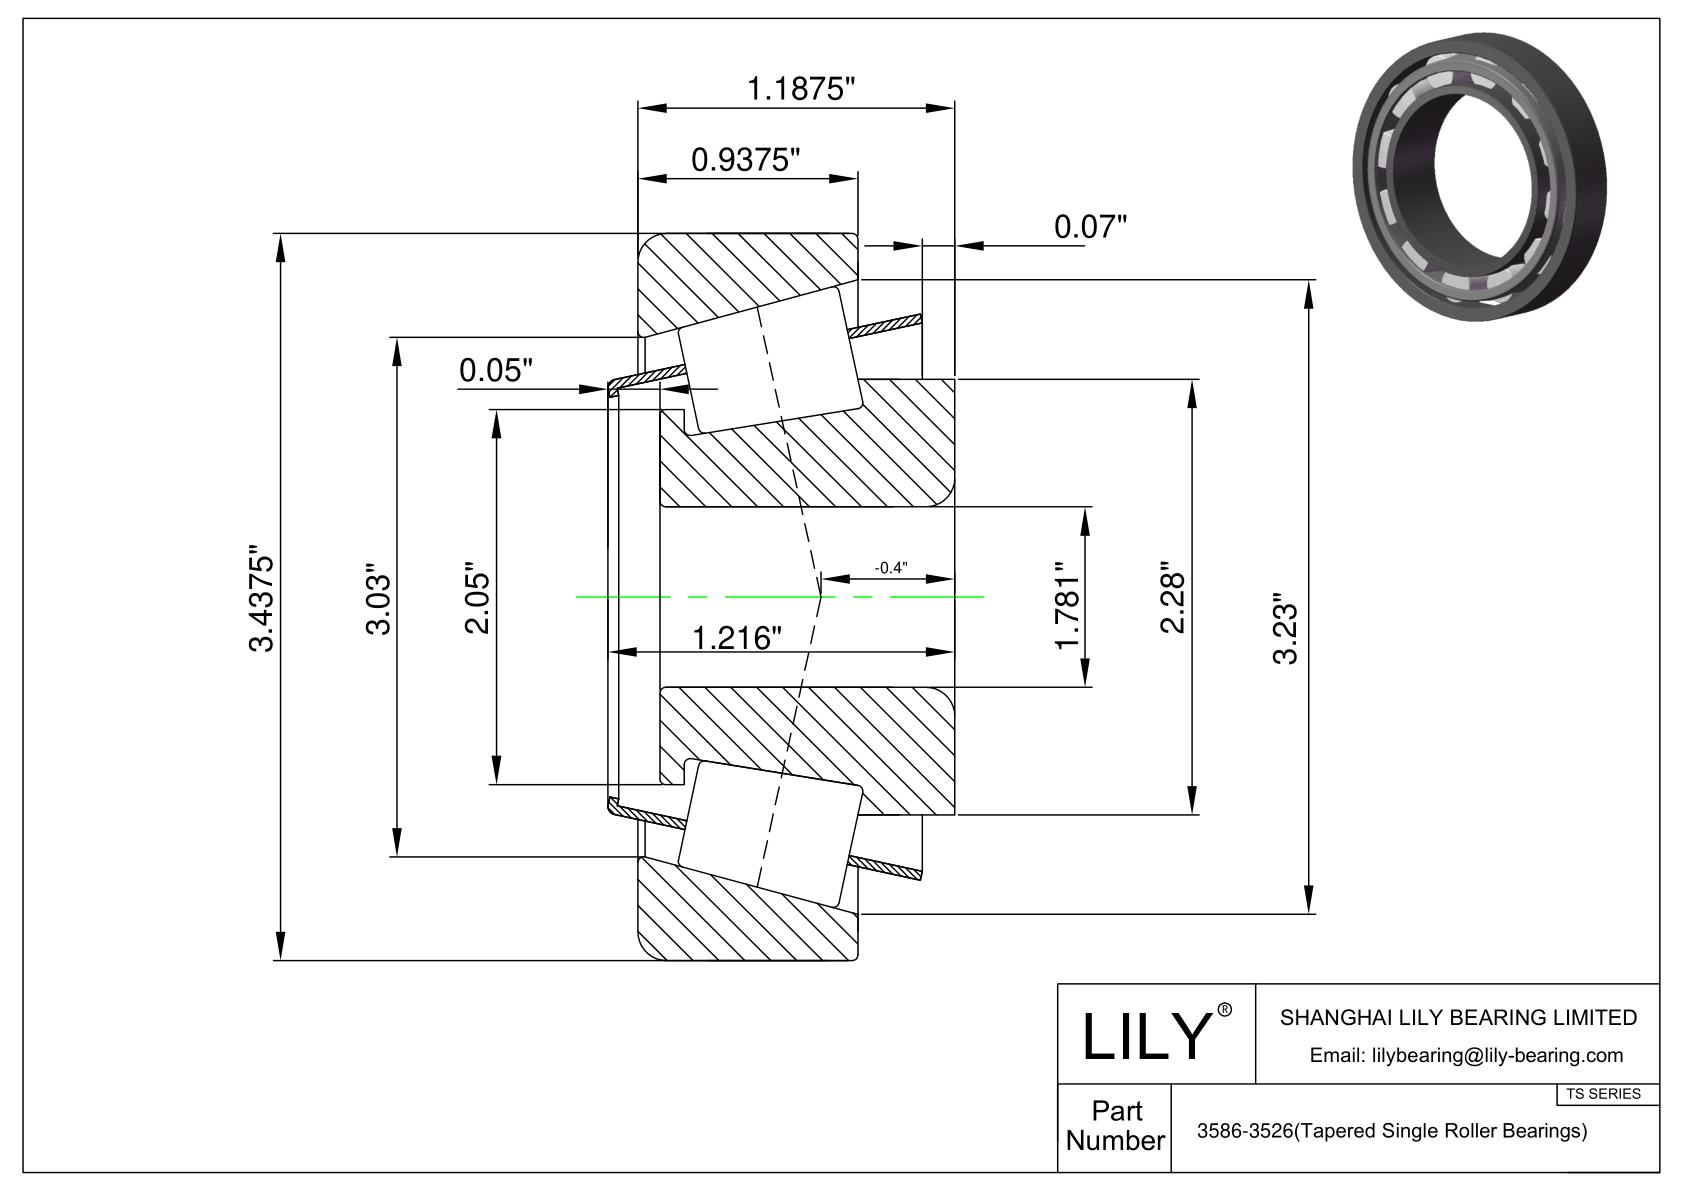 3586-3526 TS (Tapered Single Roller Bearings) (Imperial) cad drawing